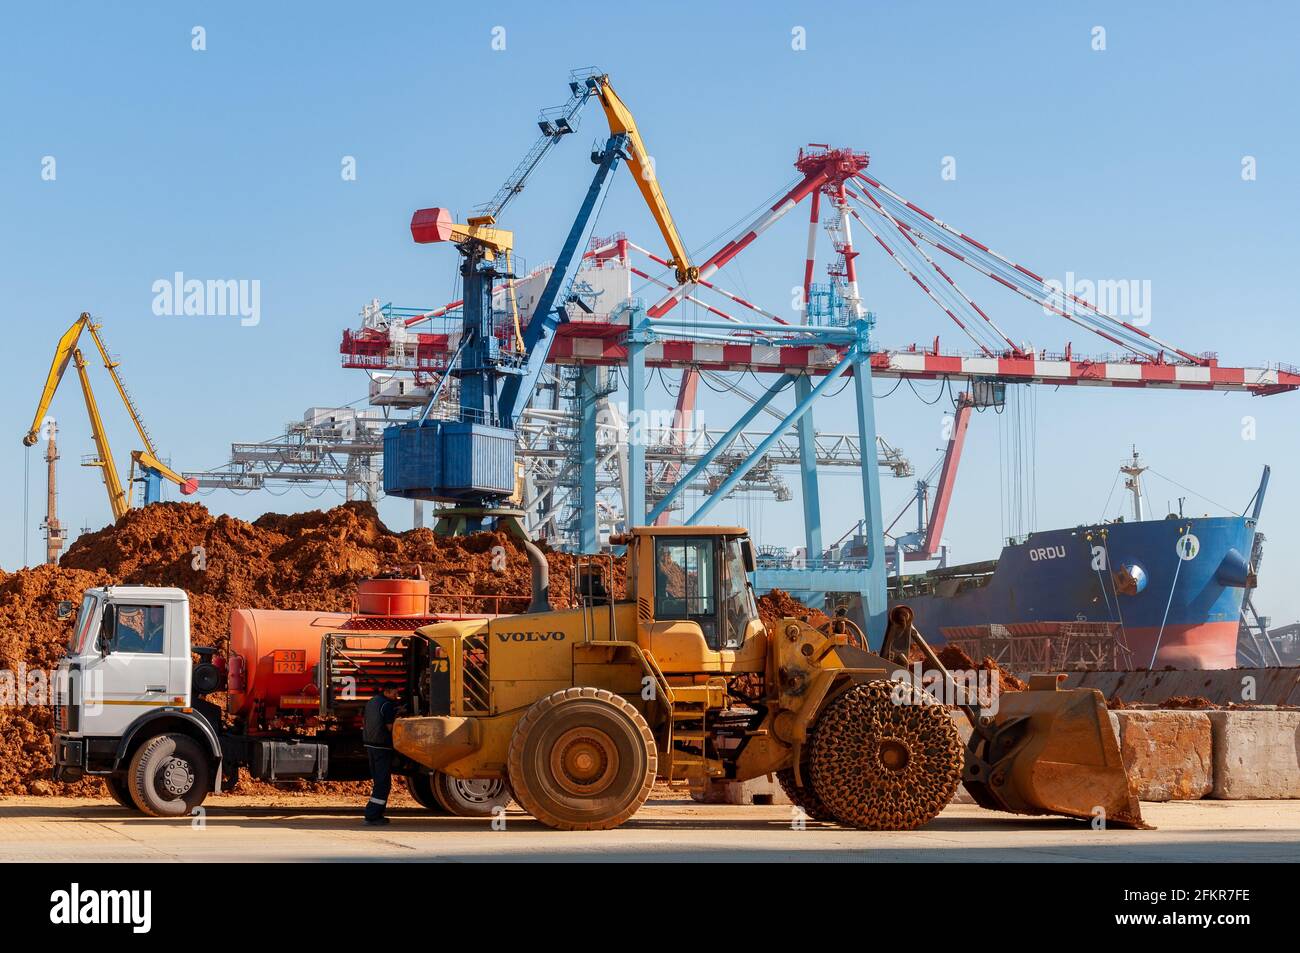 Container terminal of TIS Group dry cargo port. Construction truck and Volvo heavy bulldozer on port berth with moored cargo ship and shore cranes. Od Stock Photo